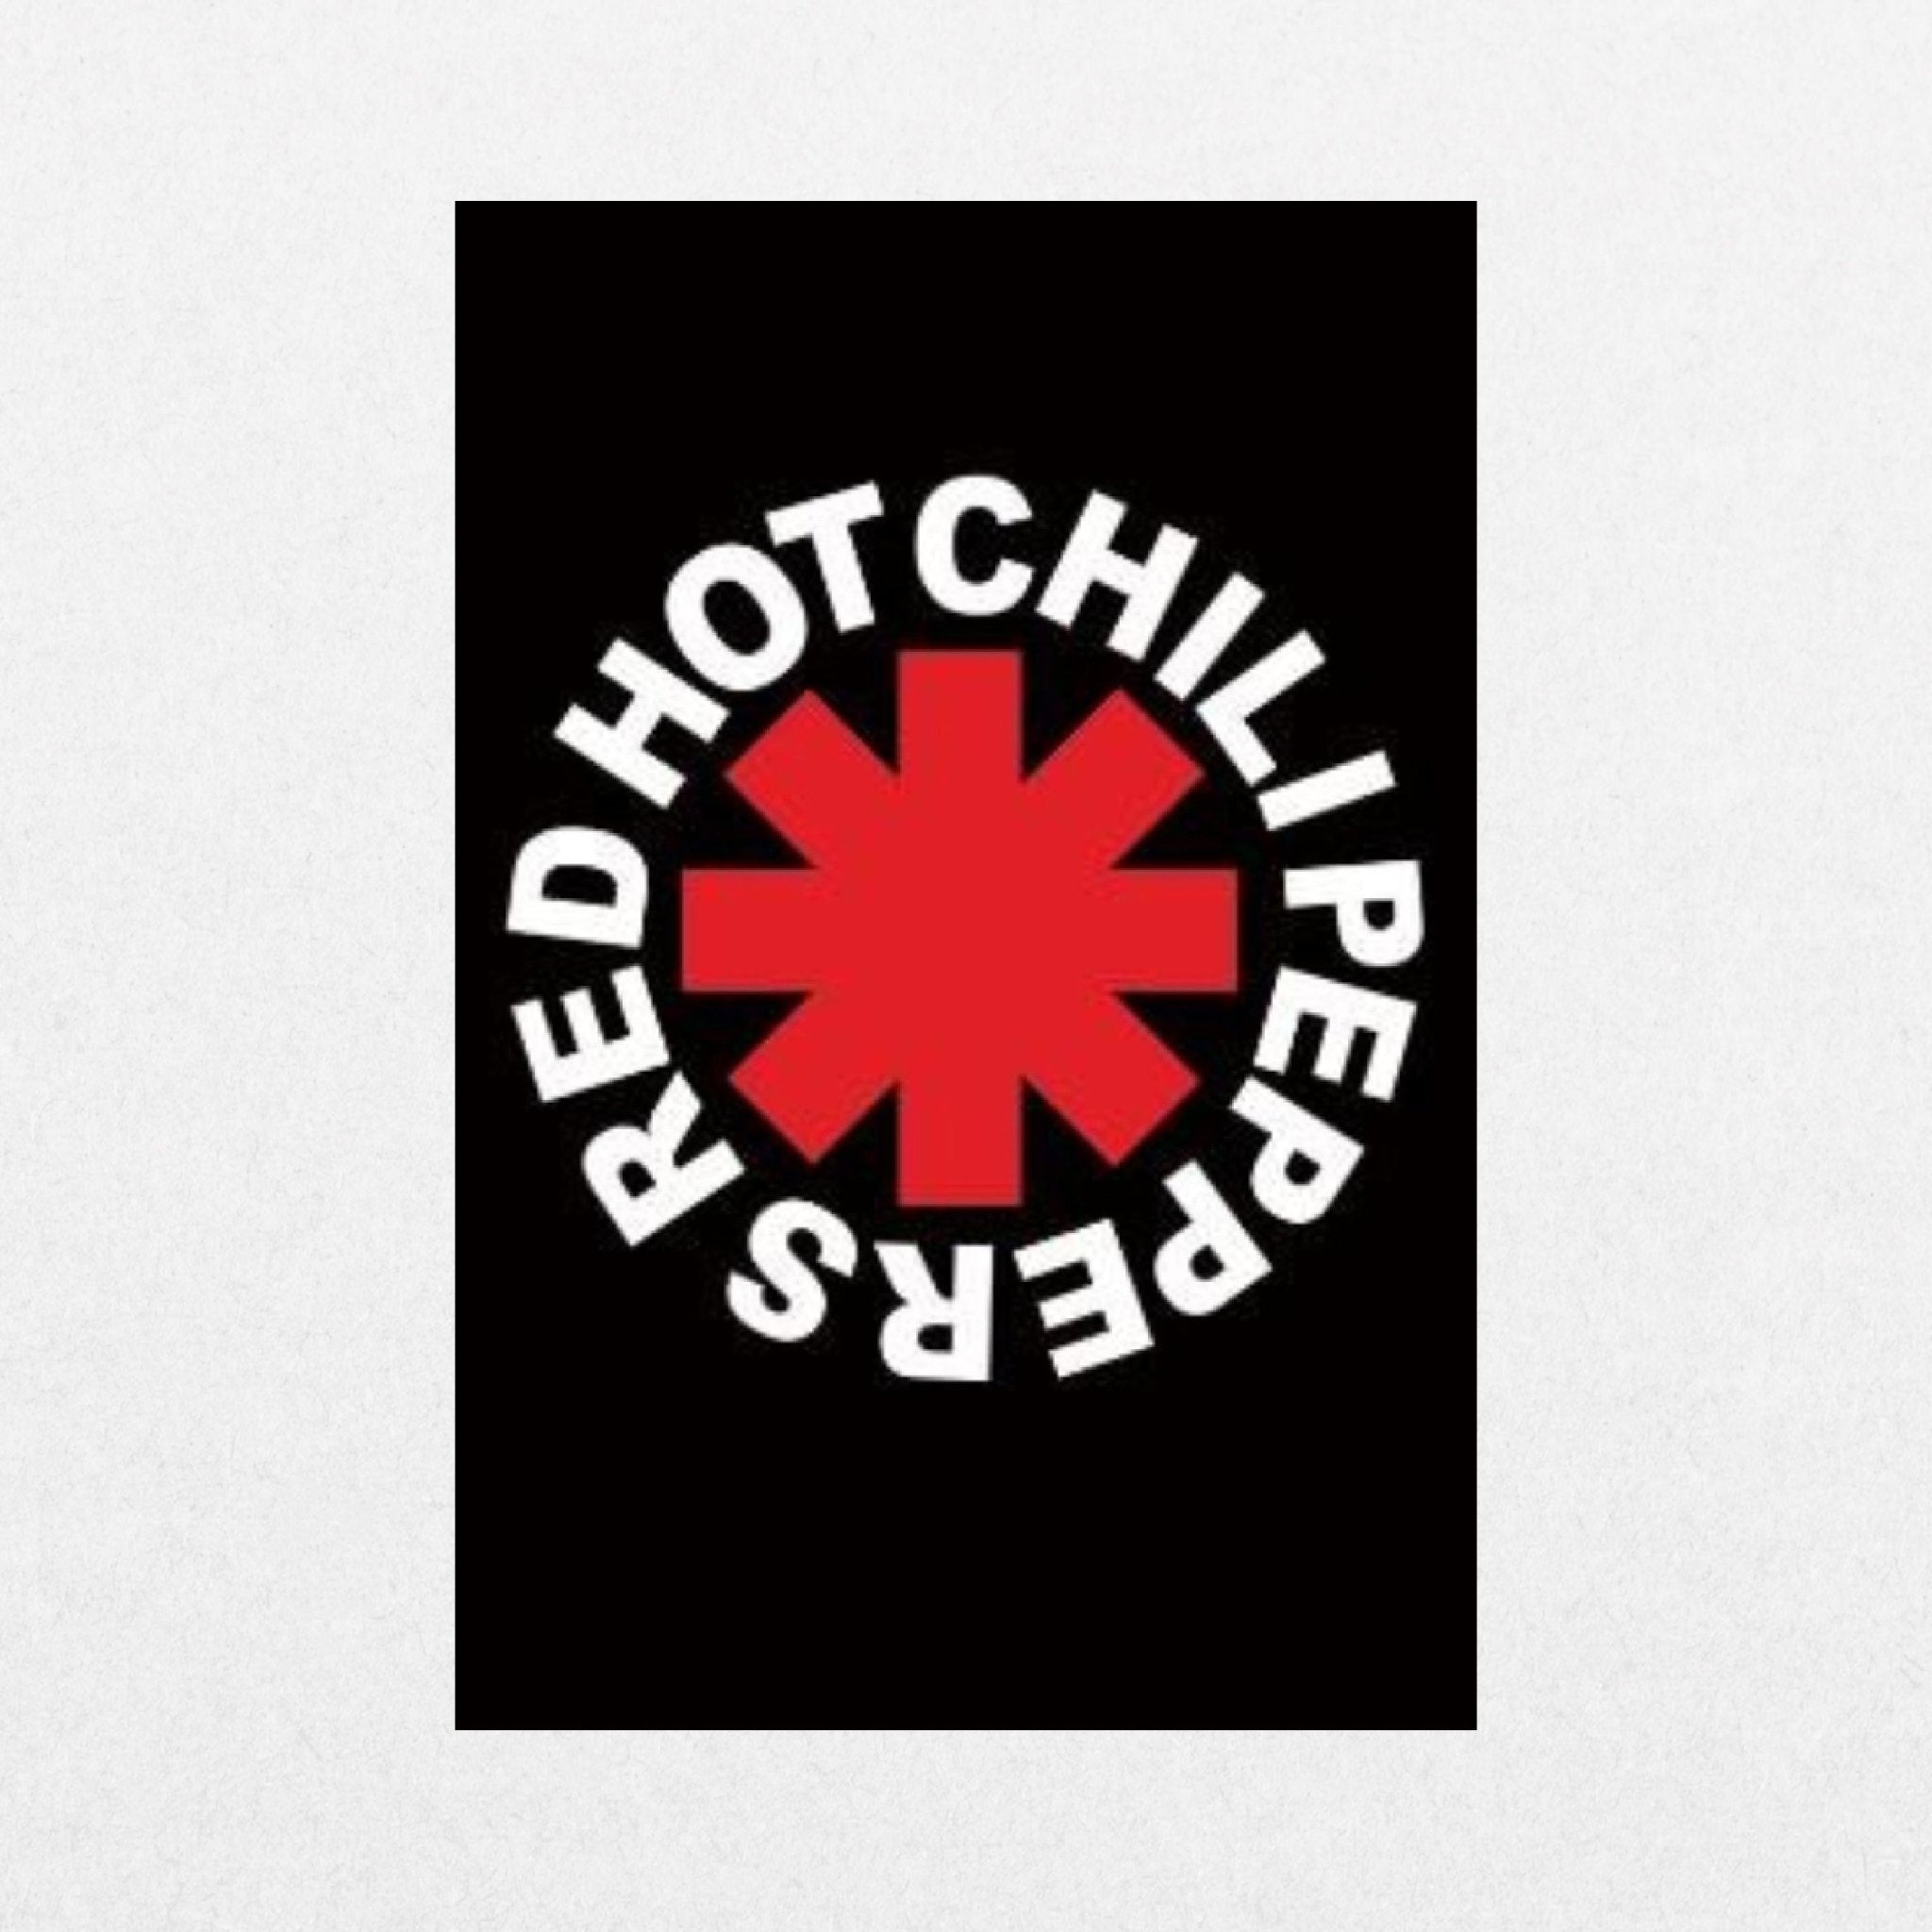 The Red Hot Chili Peppers - Logo - El Cartel